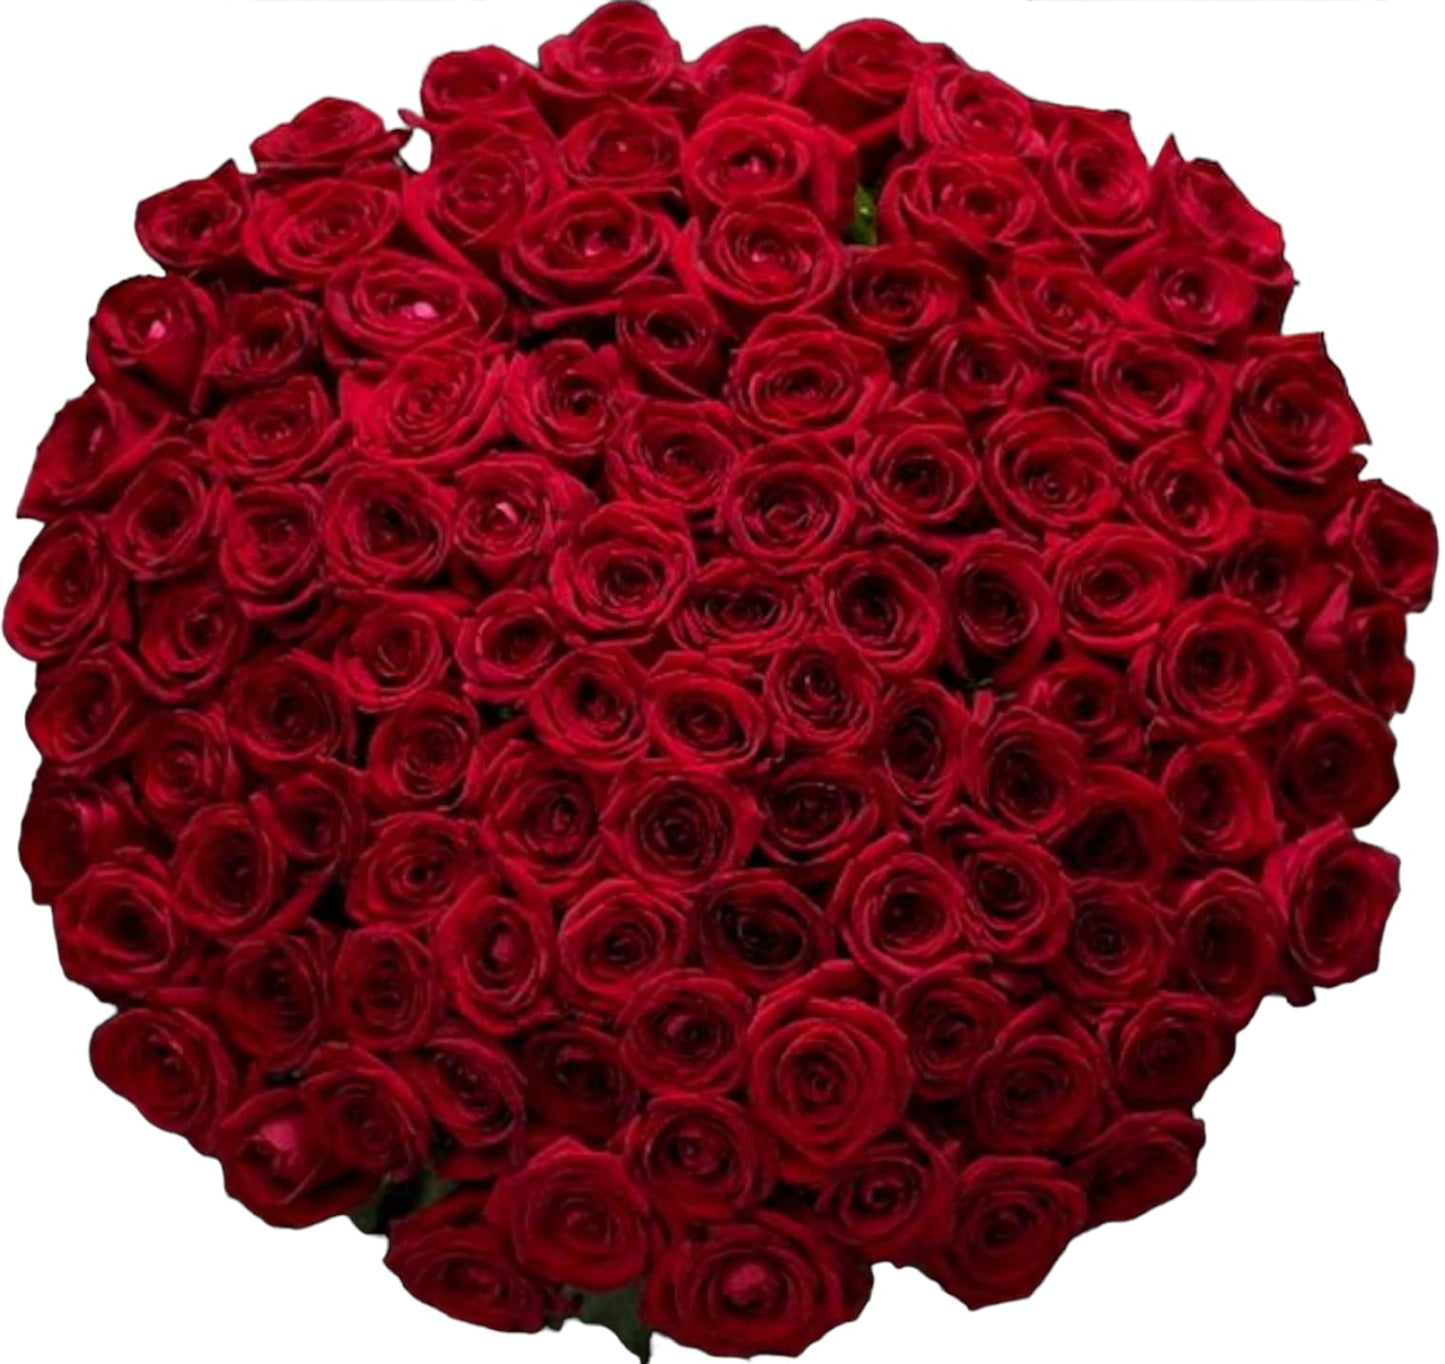 "Eternal Passion" Red Roses Bouquet